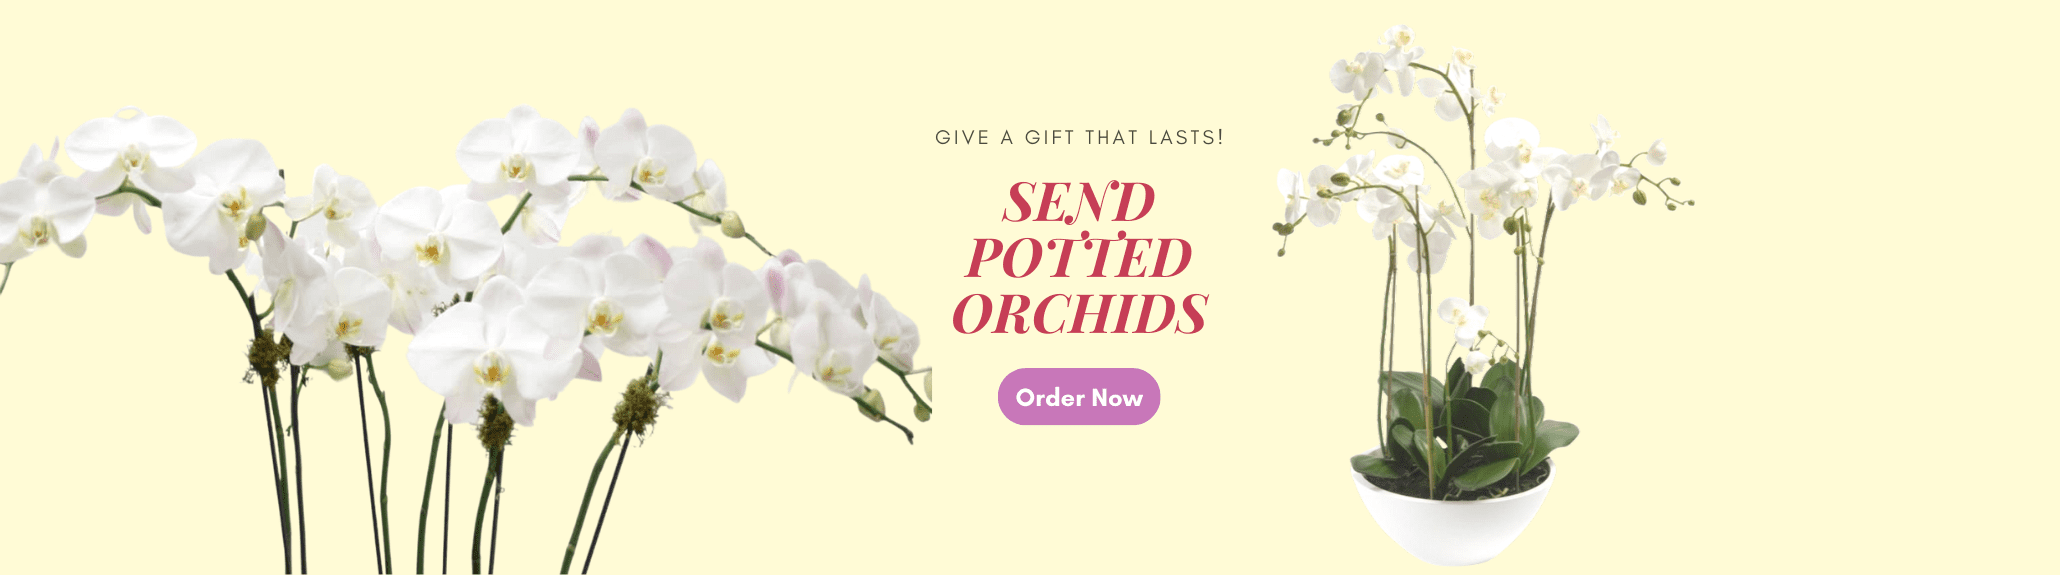 orchids-delivery-manila-banner.png